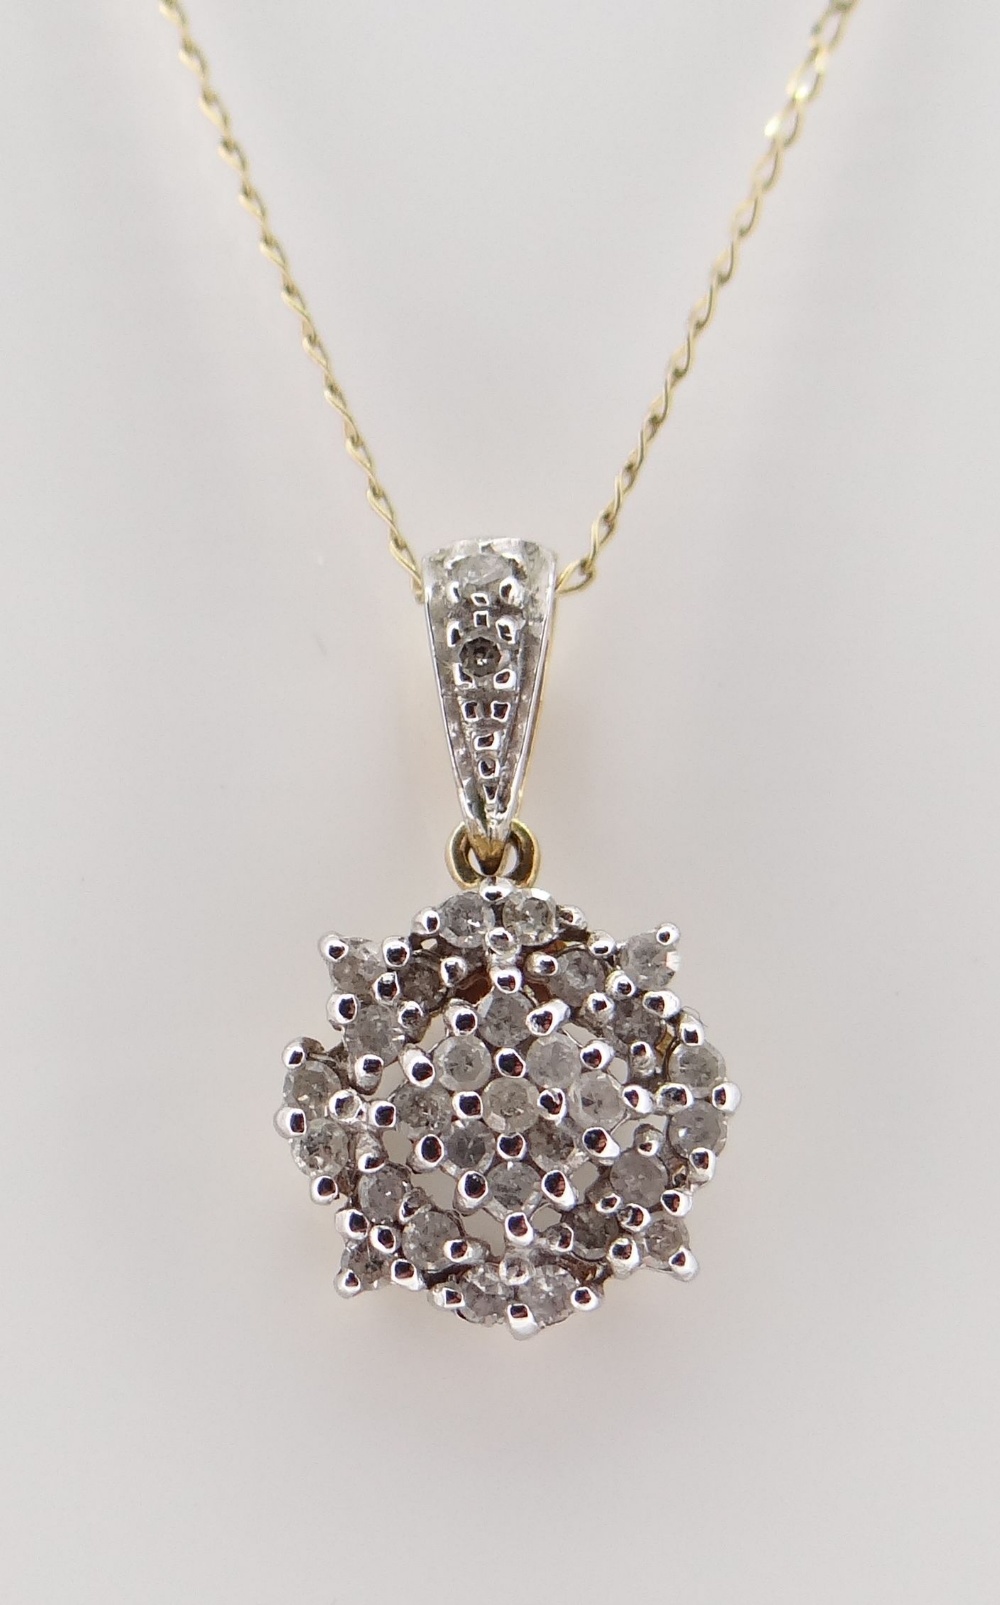 ASSORTED DIAMOND CHIP JEWELLERY comprising pair of 9ct gold earrings, 9ct gold pendant on chain - Image 2 of 3